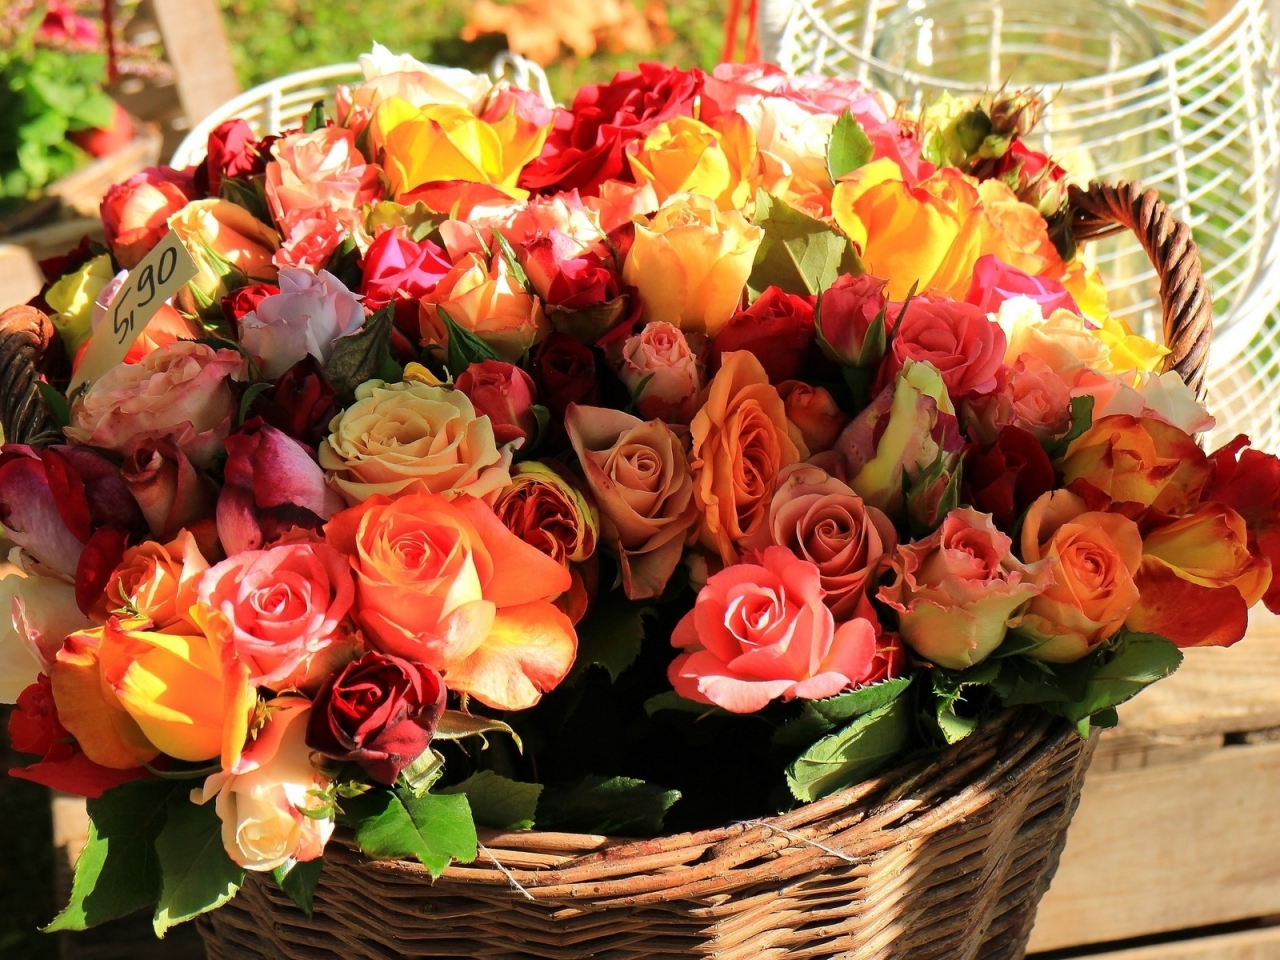 Basket of Roses for 1280 x 960 resolution